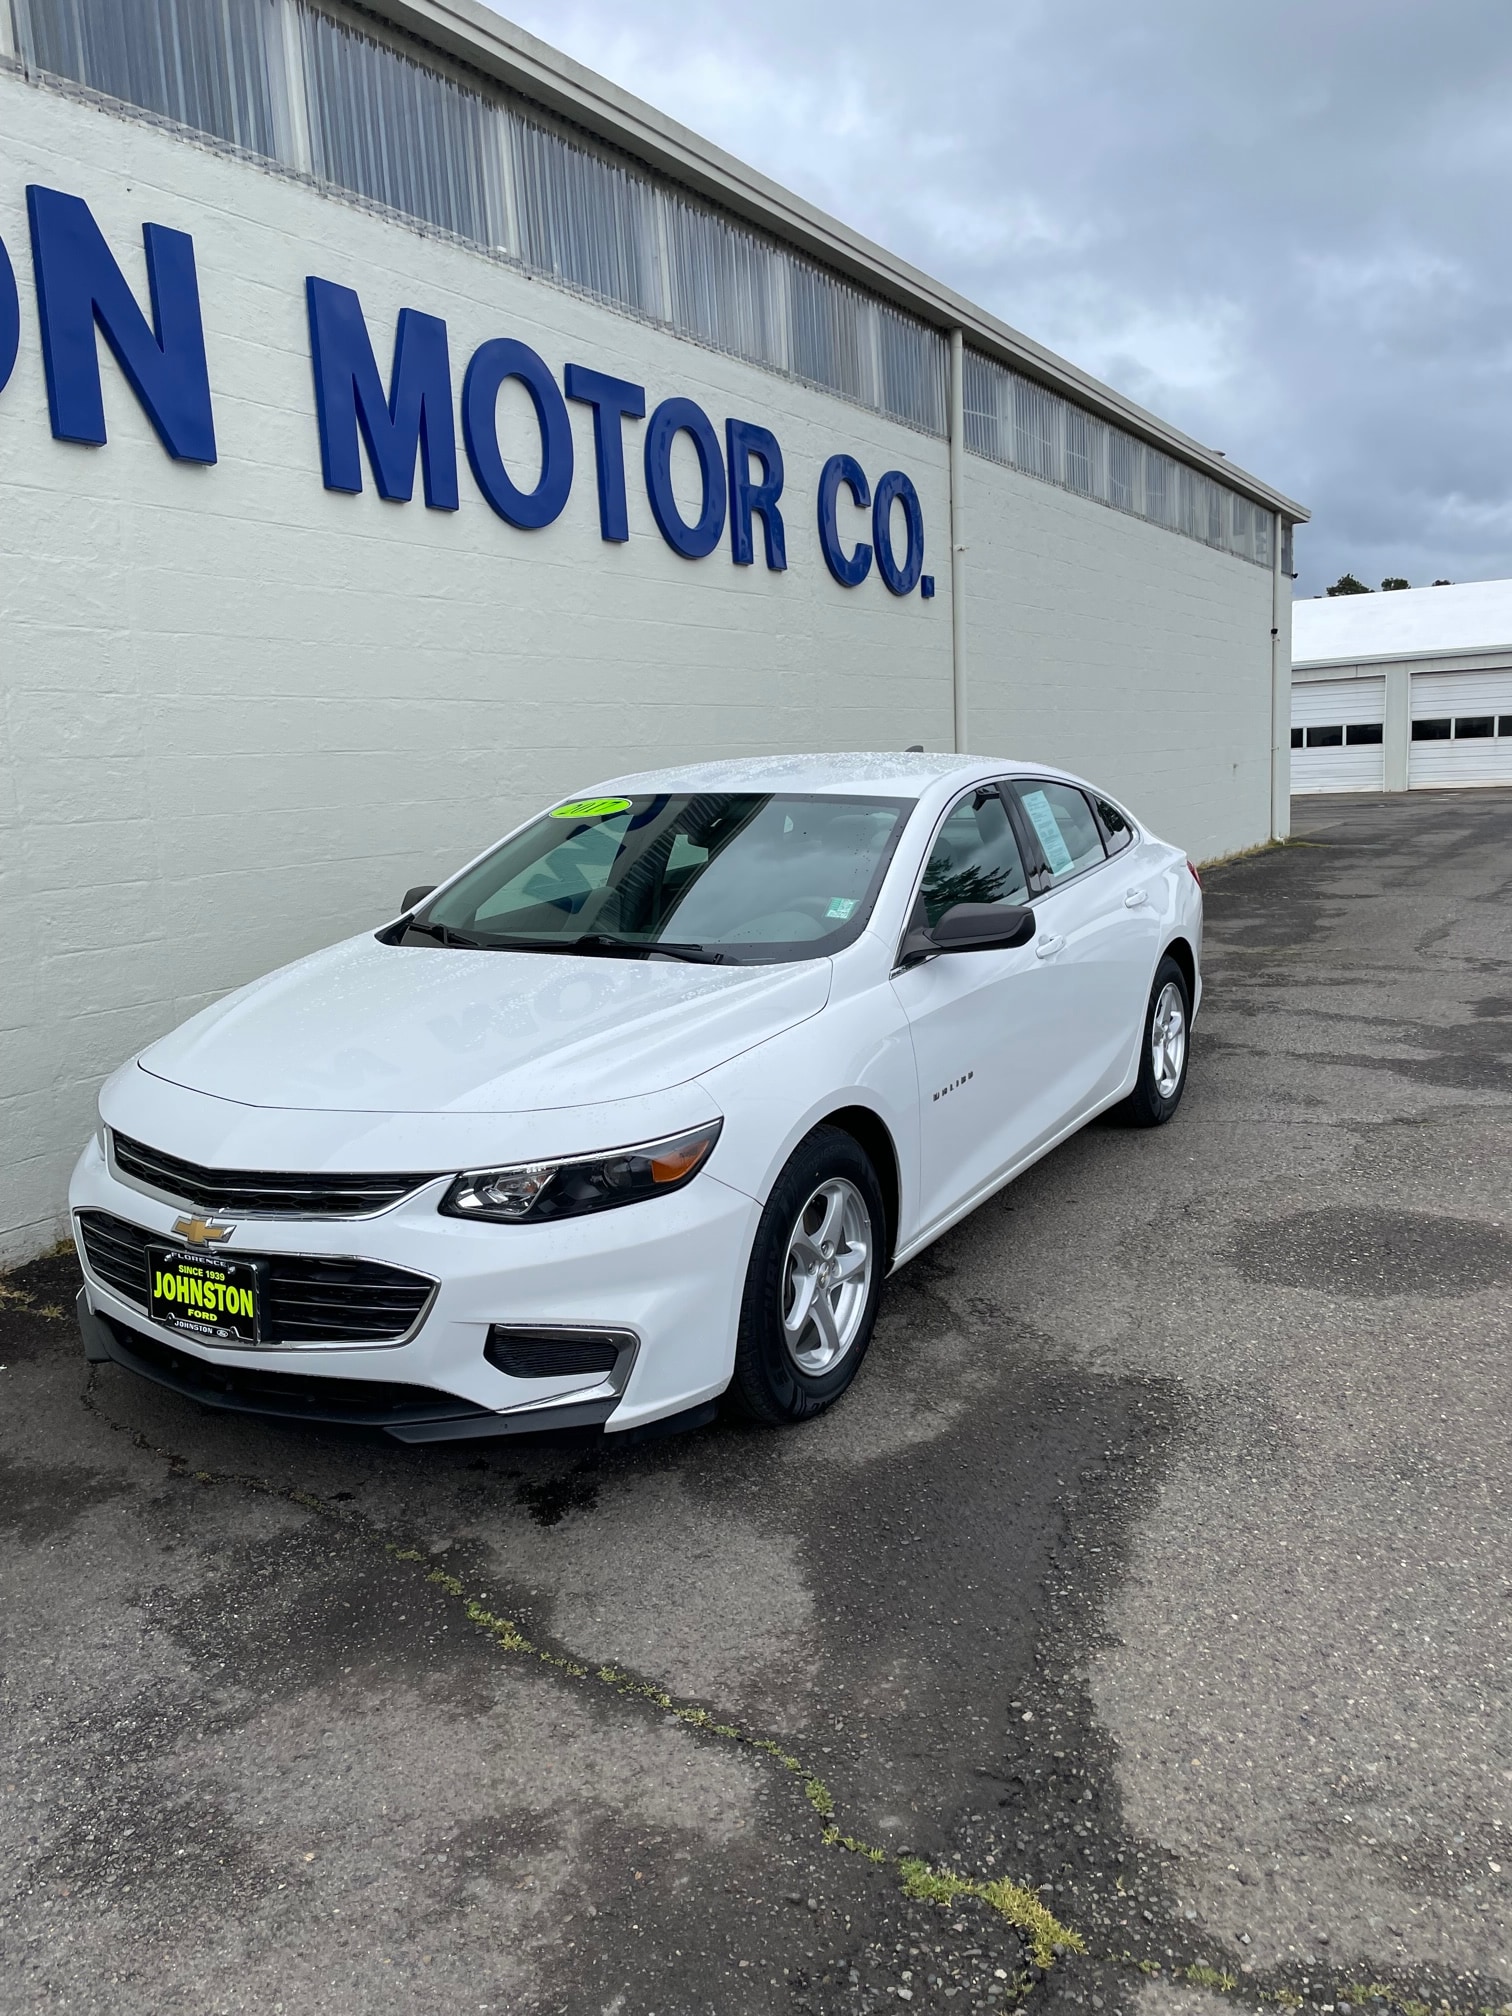 Used 2017 Chevrolet Malibu 1FL with VIN 1G1ZC5ST8HF236772 for sale in Florence, OR